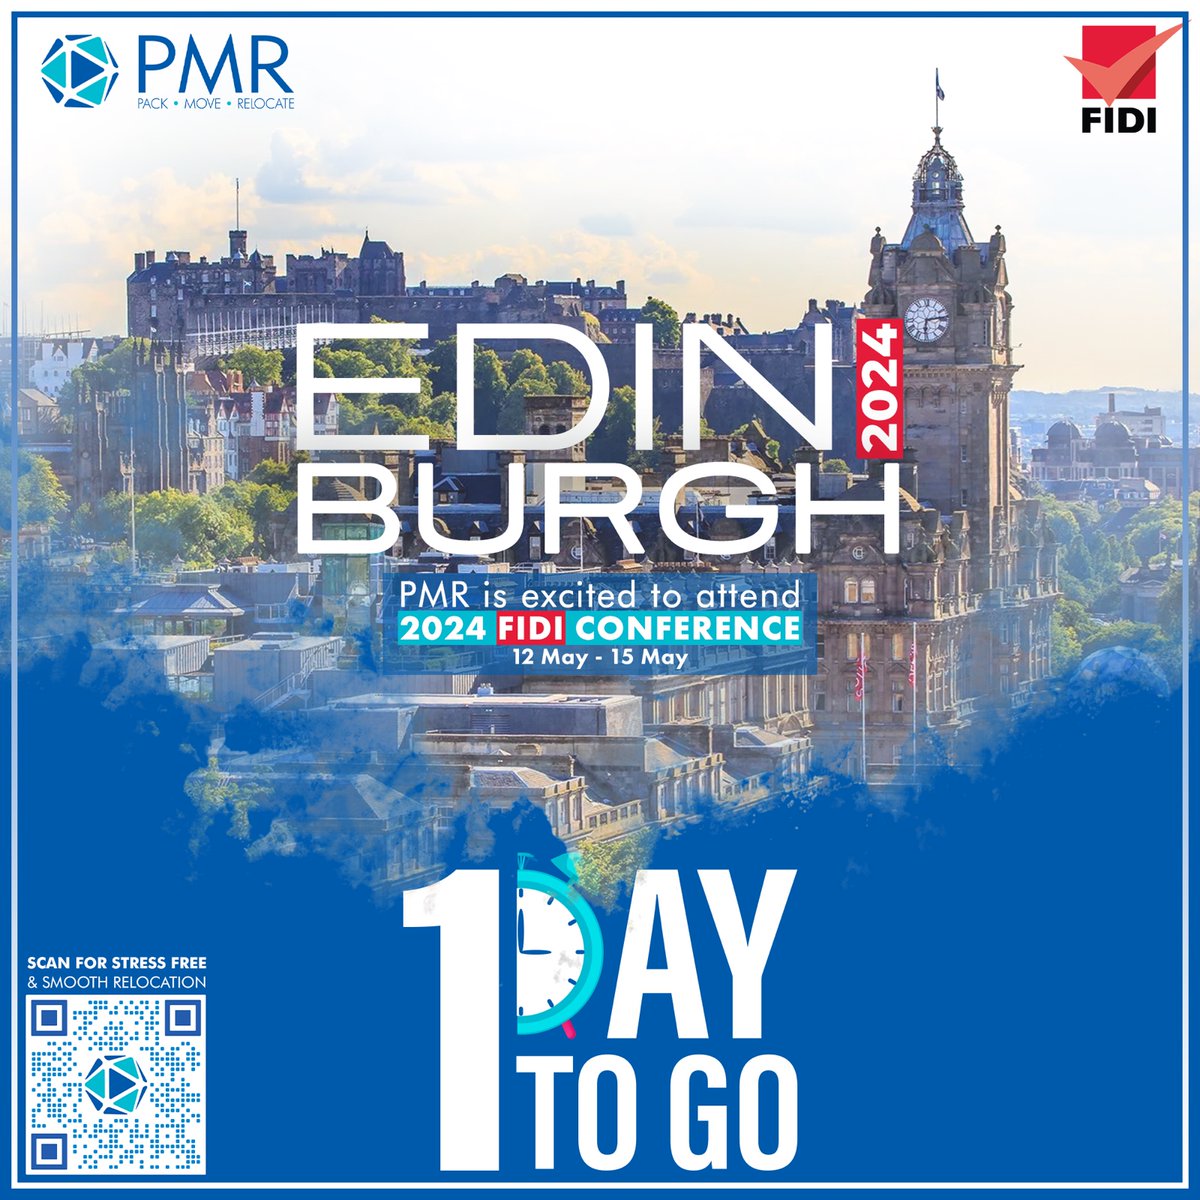 Catch us at the FIDI conference in Edinburgh, May 2024.

Meet us at the FIDI conference , 12-15 may in Edinburgh. 

#FIDI #fidiconference #moving #relocationspecialist #2024FIDIconference #FIDIglobalalliance #PMR #pmreloations #Relocationexperts #movers #packersandmovers